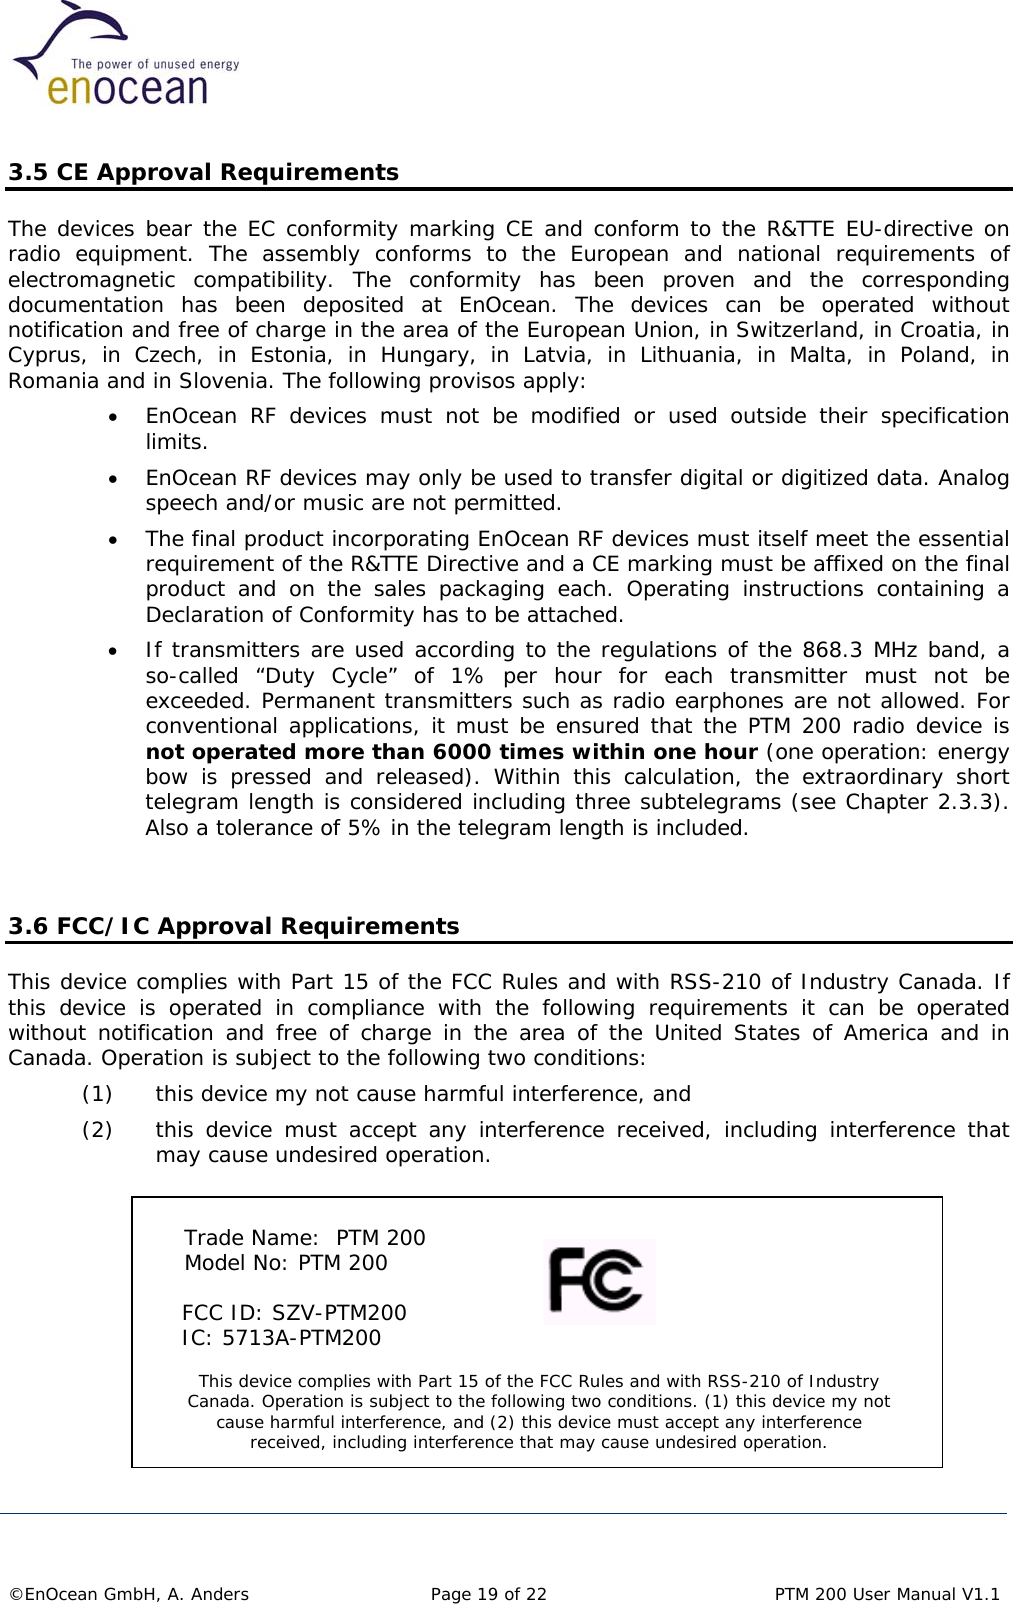  3.5 CE Approval Requirements The devices bear the EC conformity marking CE and conform to the R&amp;TTE EU-directive on radio equipment. The assembly conforms to the European and national requirements of electromagnetic compatibility. The conformity has been proven and the corresponding documentation has been deposited at EnOcean. The devices can be operated without notification and free of charge in the area of the European Union, in Switzerland, in Croatia, in Cyprus, in Czech, in Estonia, in Hungary, in Latvia, in Lithuania, in Malta, in Poland, in Romania and in Slovenia. The following provisos apply: •  EnOcean RF devices must not be modified or used outside their specification limits. •  EnOcean RF devices may only be used to transfer digital or digitized data. Analog speech and/or music are not permitted. •  The final product incorporating EnOcean RF devices must itself meet the essential requirement of the R&amp;TTE Directive and a CE marking must be affixed on the final product and on the sales packaging each. Operating instructions containing a Declaration of Conformity has to be attached. •  If transmitters are used according to the regulations of the 868.3 MHz band, a so-called “Duty Cycle” of 1% per hour for each transmitter must not be exceeded. Permanent transmitters such as radio earphones are not allowed. For conventional applications, it must be ensured that the PTM 200 radio device is not operated more than 6000 times within one hour (one operation: energy bow is pressed and released). Within this calculation, the extraordinary short telegram length is considered including three subtelegrams (see Chapter 2.3.3). Also a tolerance of 5% in the telegram length is included.   3.6 FCC/IC Approval Requirements This device complies with Part 15 of the FCC Rules and with RSS-210 of Industry Canada. If this device is operated in compliance with the following requirements it can be operated without notification and free of charge in the area of the United States of America and in Canada. Operation is subject to the following two conditions: (1)  this device my not cause harmful interference, and  (2)  this device must accept any interference received, including interference that may cause undesired operation.          Trade Name:  PTM 200  Model No: PTM 200 This device complies with Part 15 of the FCC Rules and with RSS-210 of Industry Canada. Operation is subject to the following two conditions. (1) this device my not cause harmful interference, and (2) this device must accept any interference received, including interference that may cause undesired operation.      FCC ID: SZV-PTM200      IC: 5713A-PTM200      ©EnOcean GmbH, A. Anders   Page 19 of 22    PTM 200 User Manual V1.1  